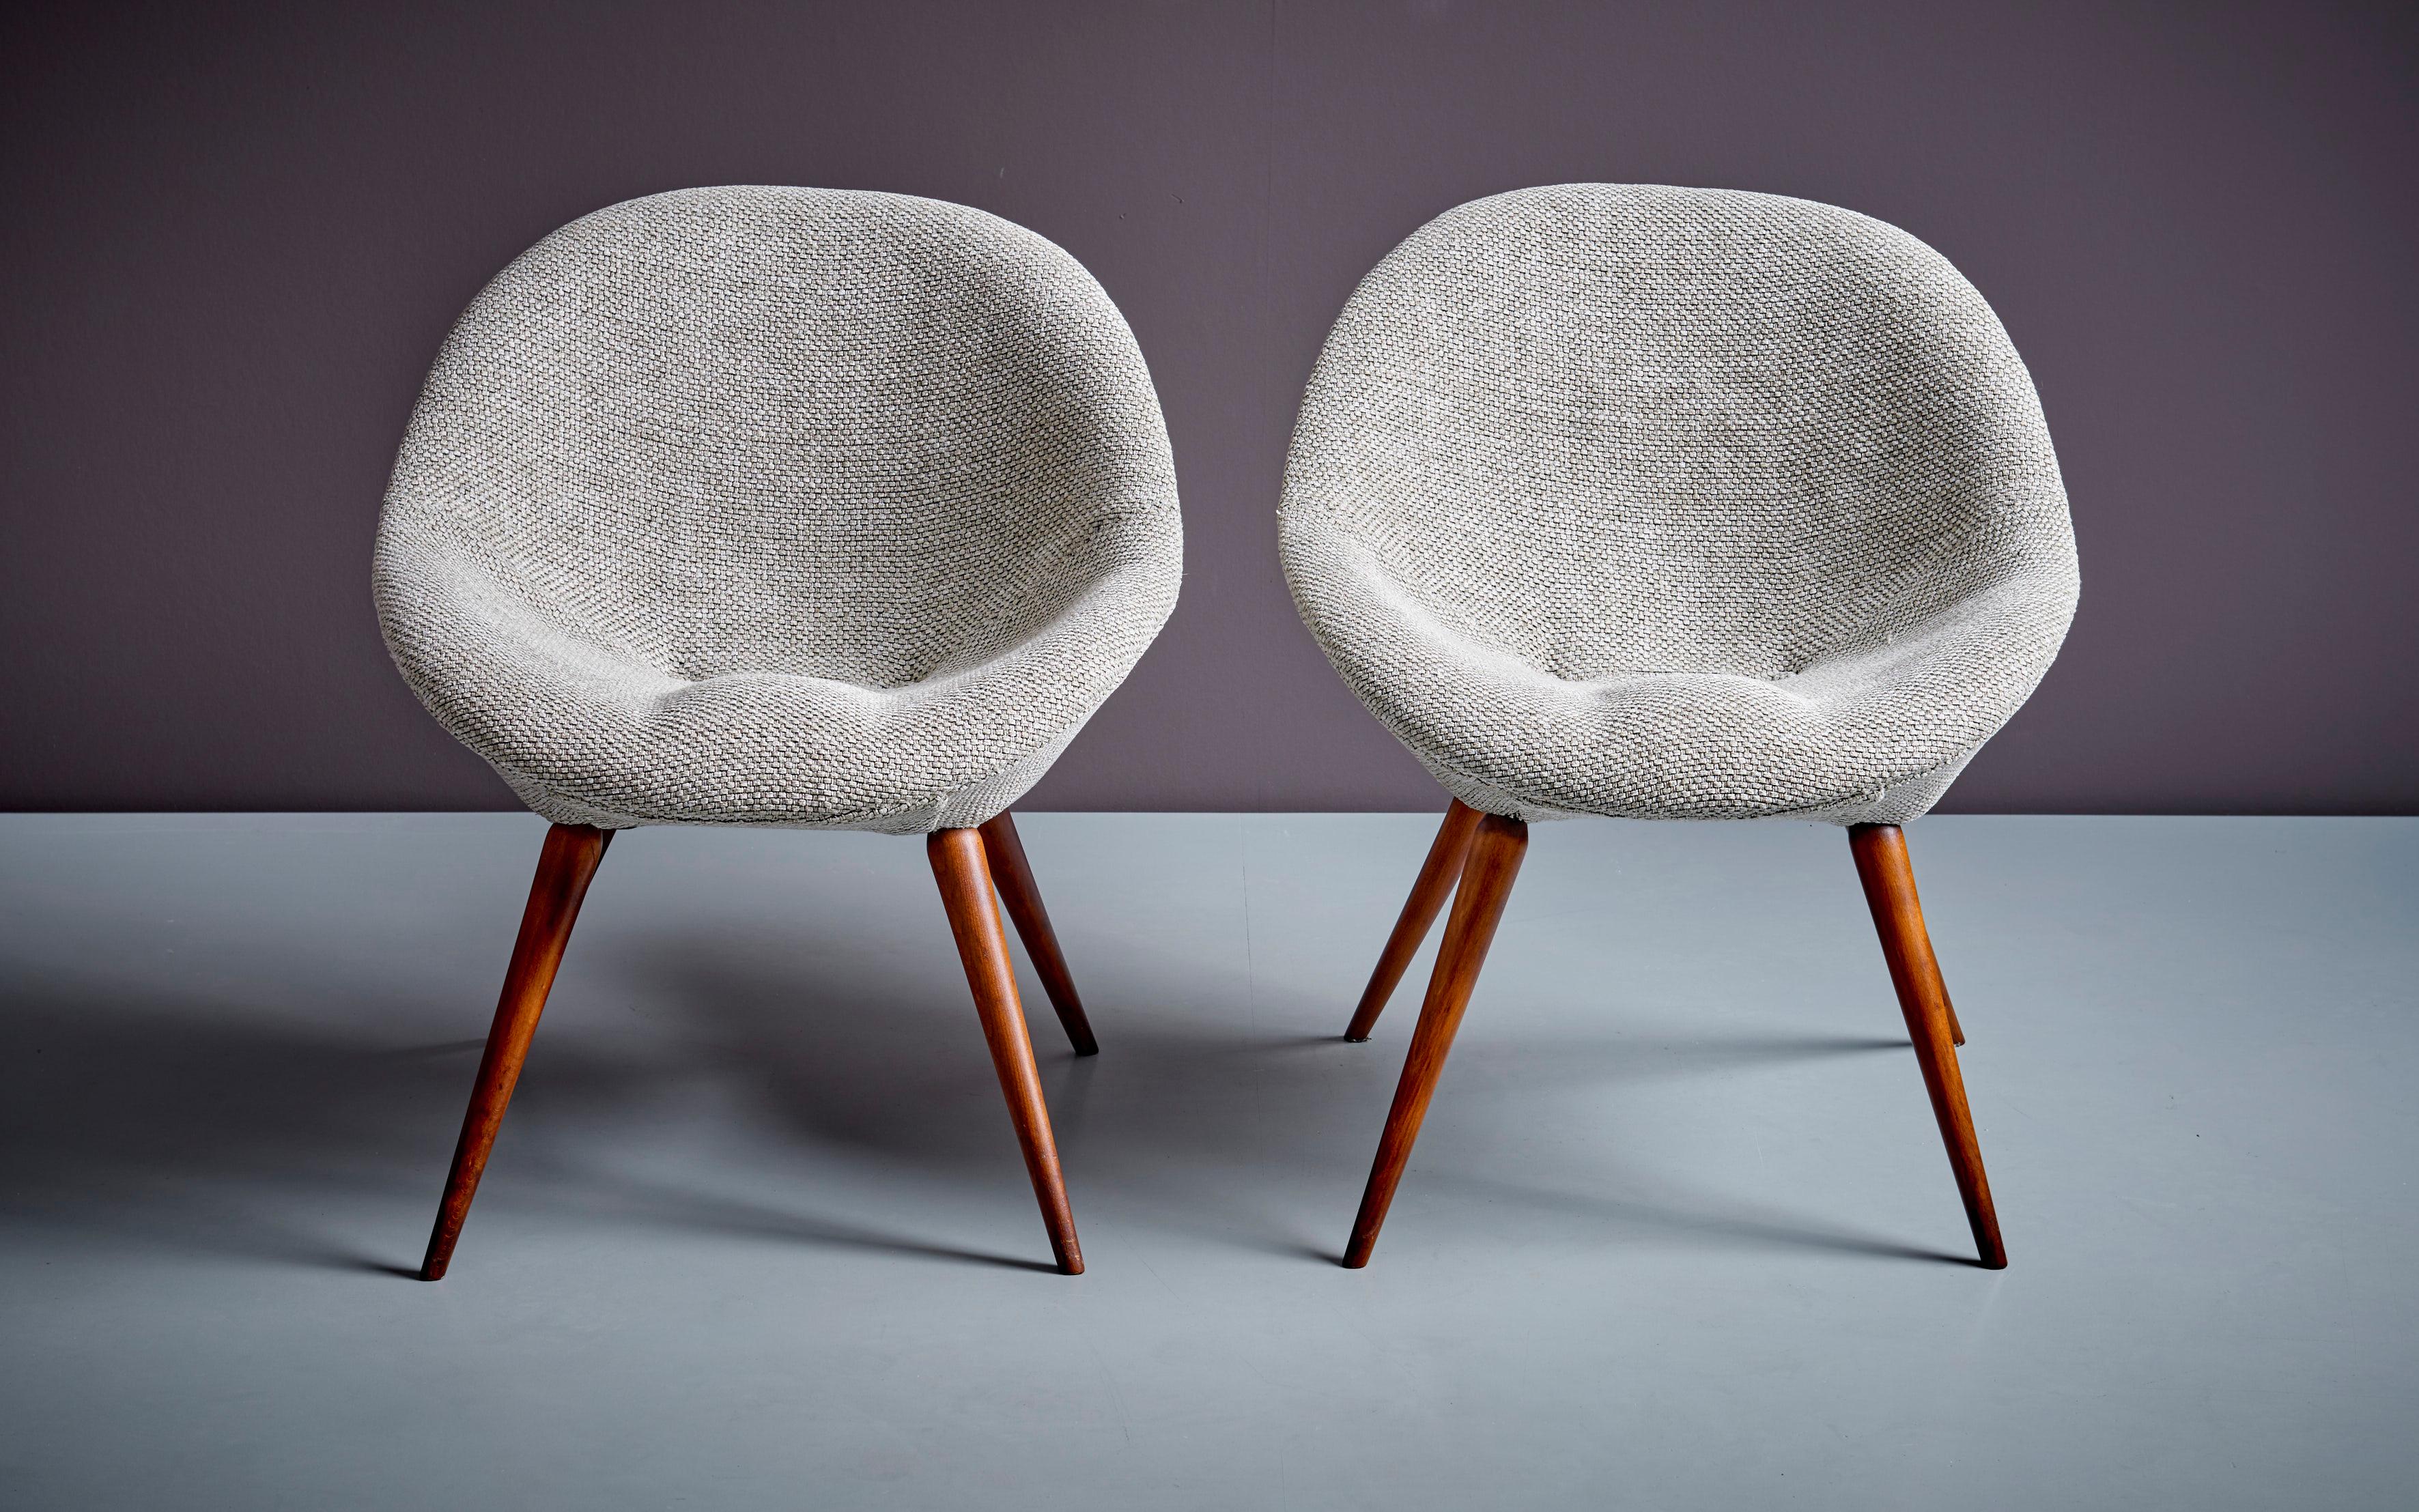 Pair of newly upholstered Fritz Neth Lounge Chairs in Gray, Germany - 1960s. These Fritz Neth chairs feature sleek design and high-quality craftsmanship, combined with both flexibility and comfort. Neth was a German furniture designer, born in 1932,